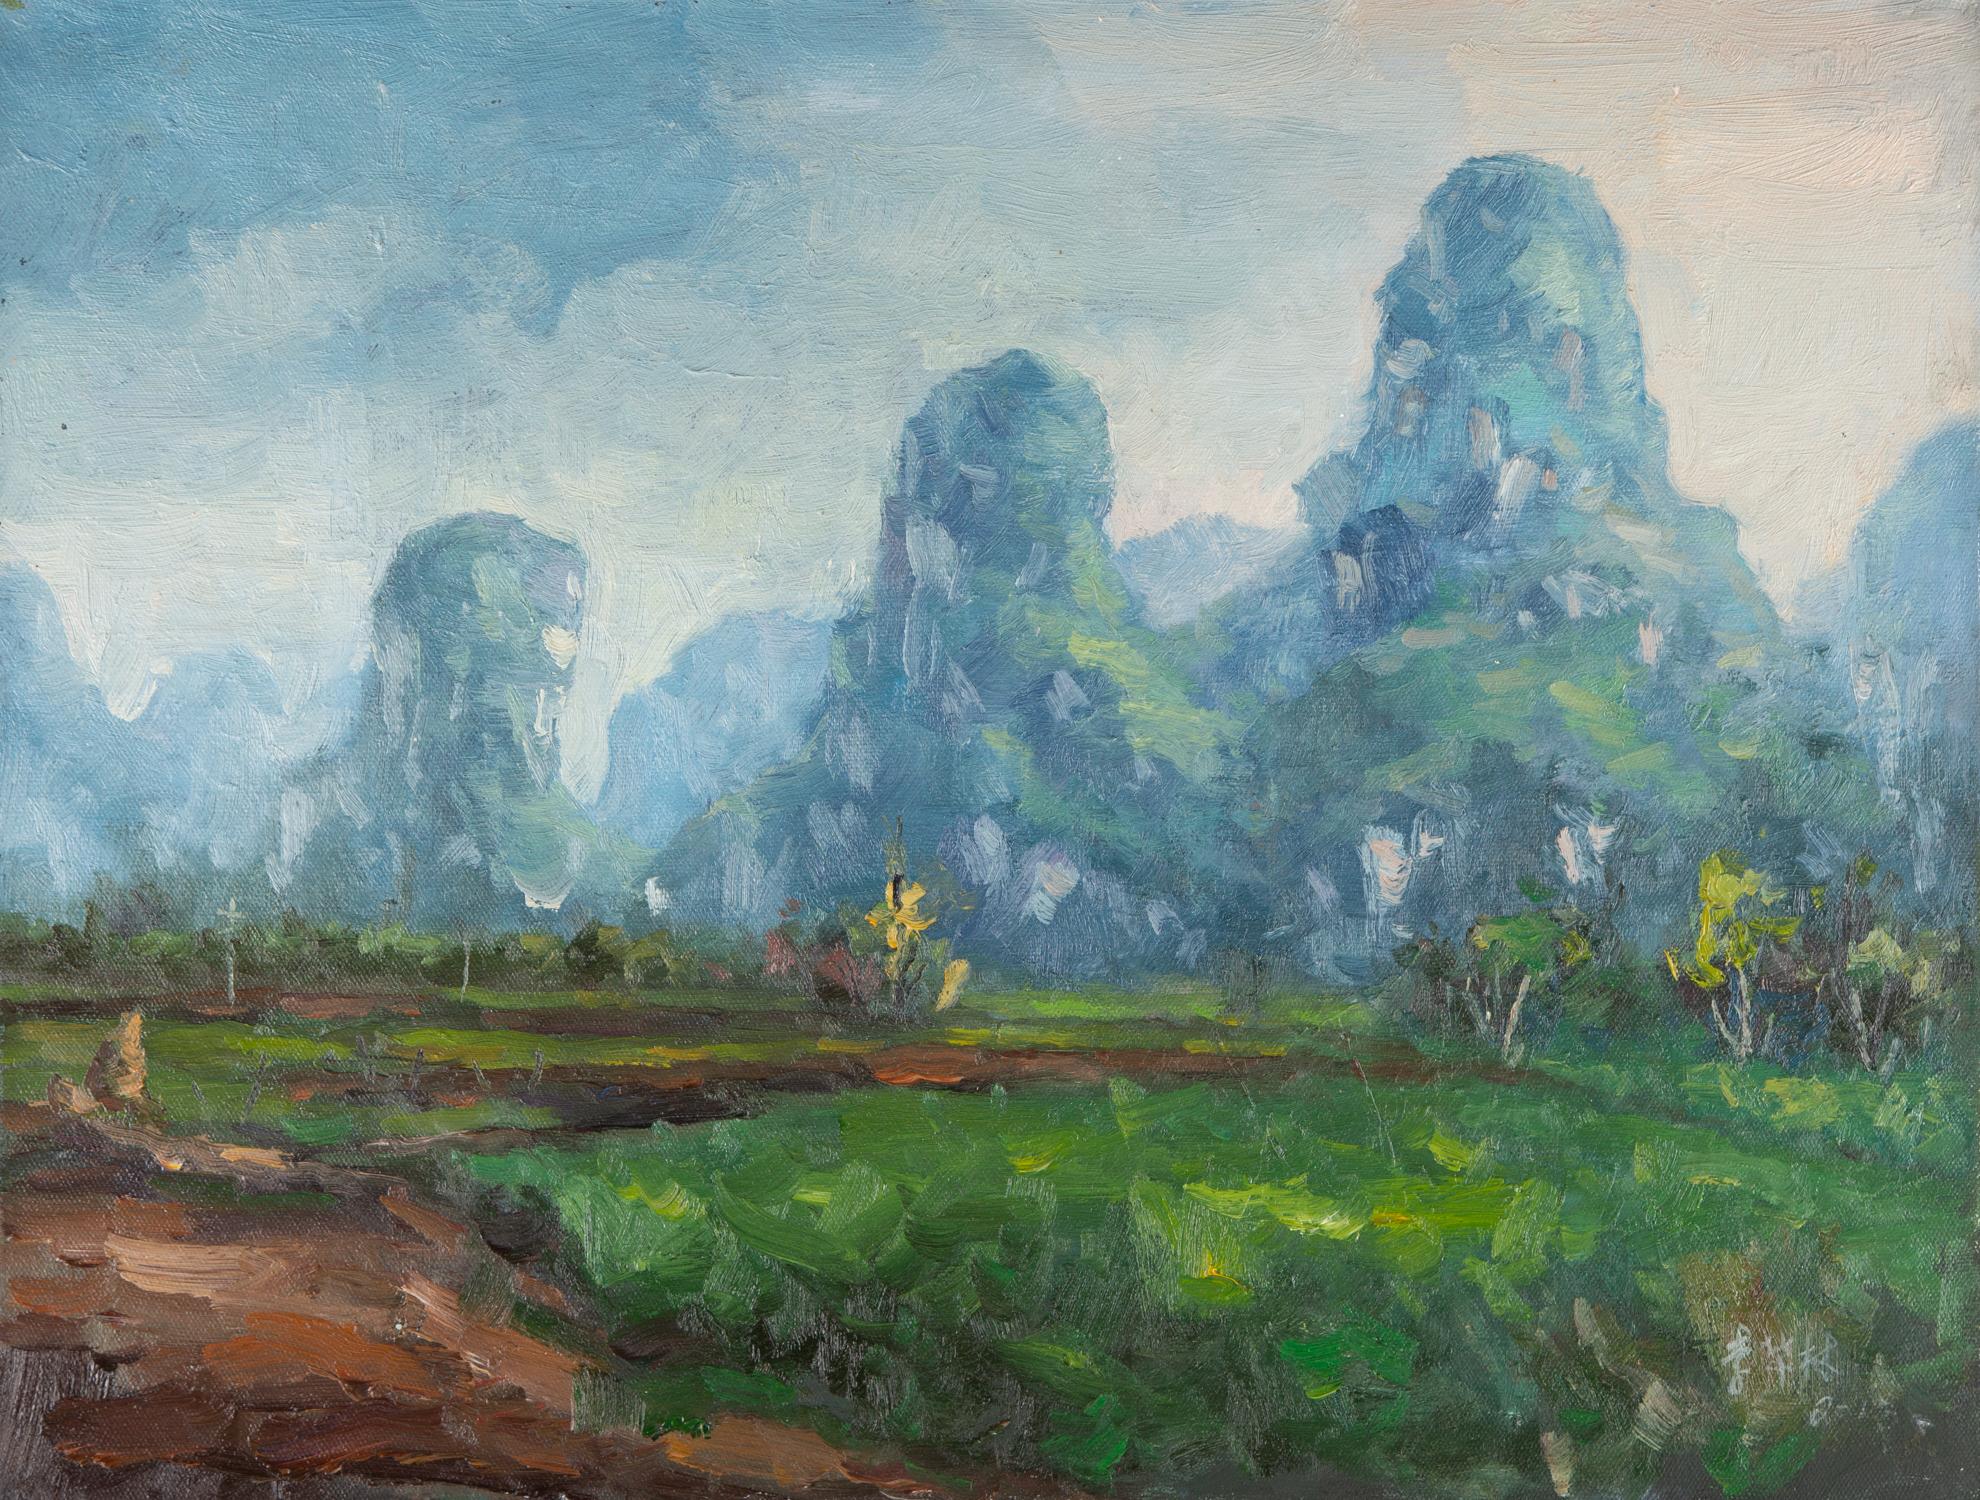 Title: Guilin Landscape 1
 Medium: Oil on canvas
 Size: 19.5 x 25.5 inches
 Frame: Framing options available!
 Condition: The painting appears to be in excellent condition.
 Note: This painting is unstretched
 Artist: Hualin Li
 Signature: Signed
